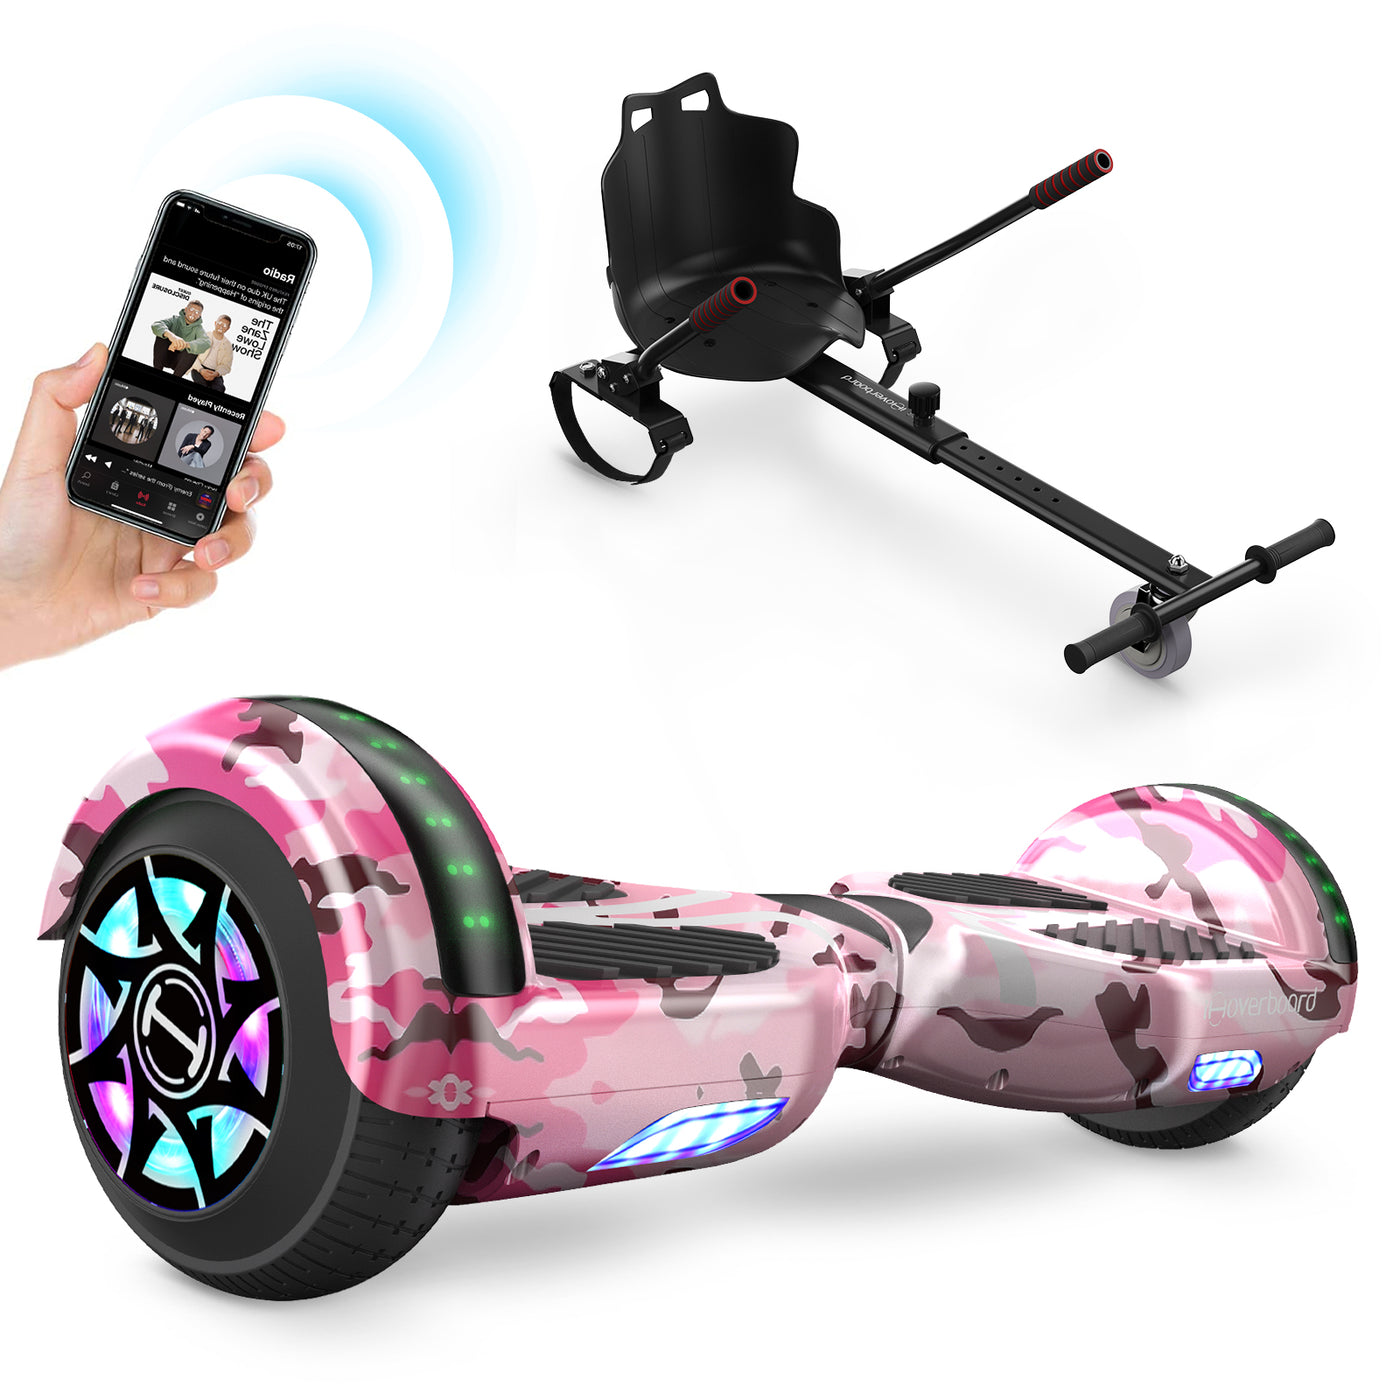 iHoverboard H2 Pink Self Balancing Hoverboard with Dual 350W Motor (700W)